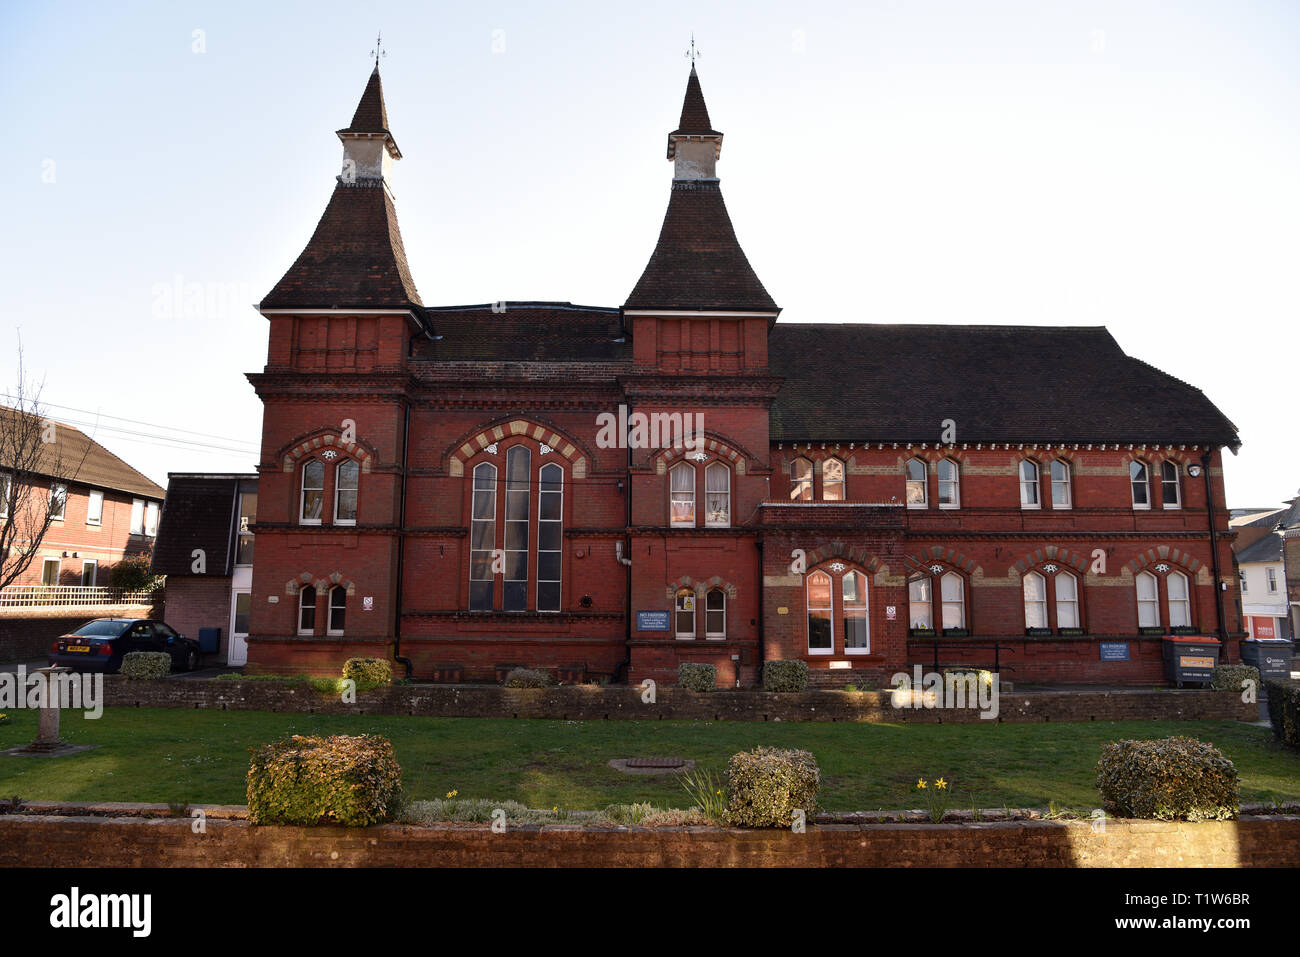 Assembly Rooms, a venue for events and exhibitions which was completed in 1880, Alton, Hampshire, UK. Stock Photo